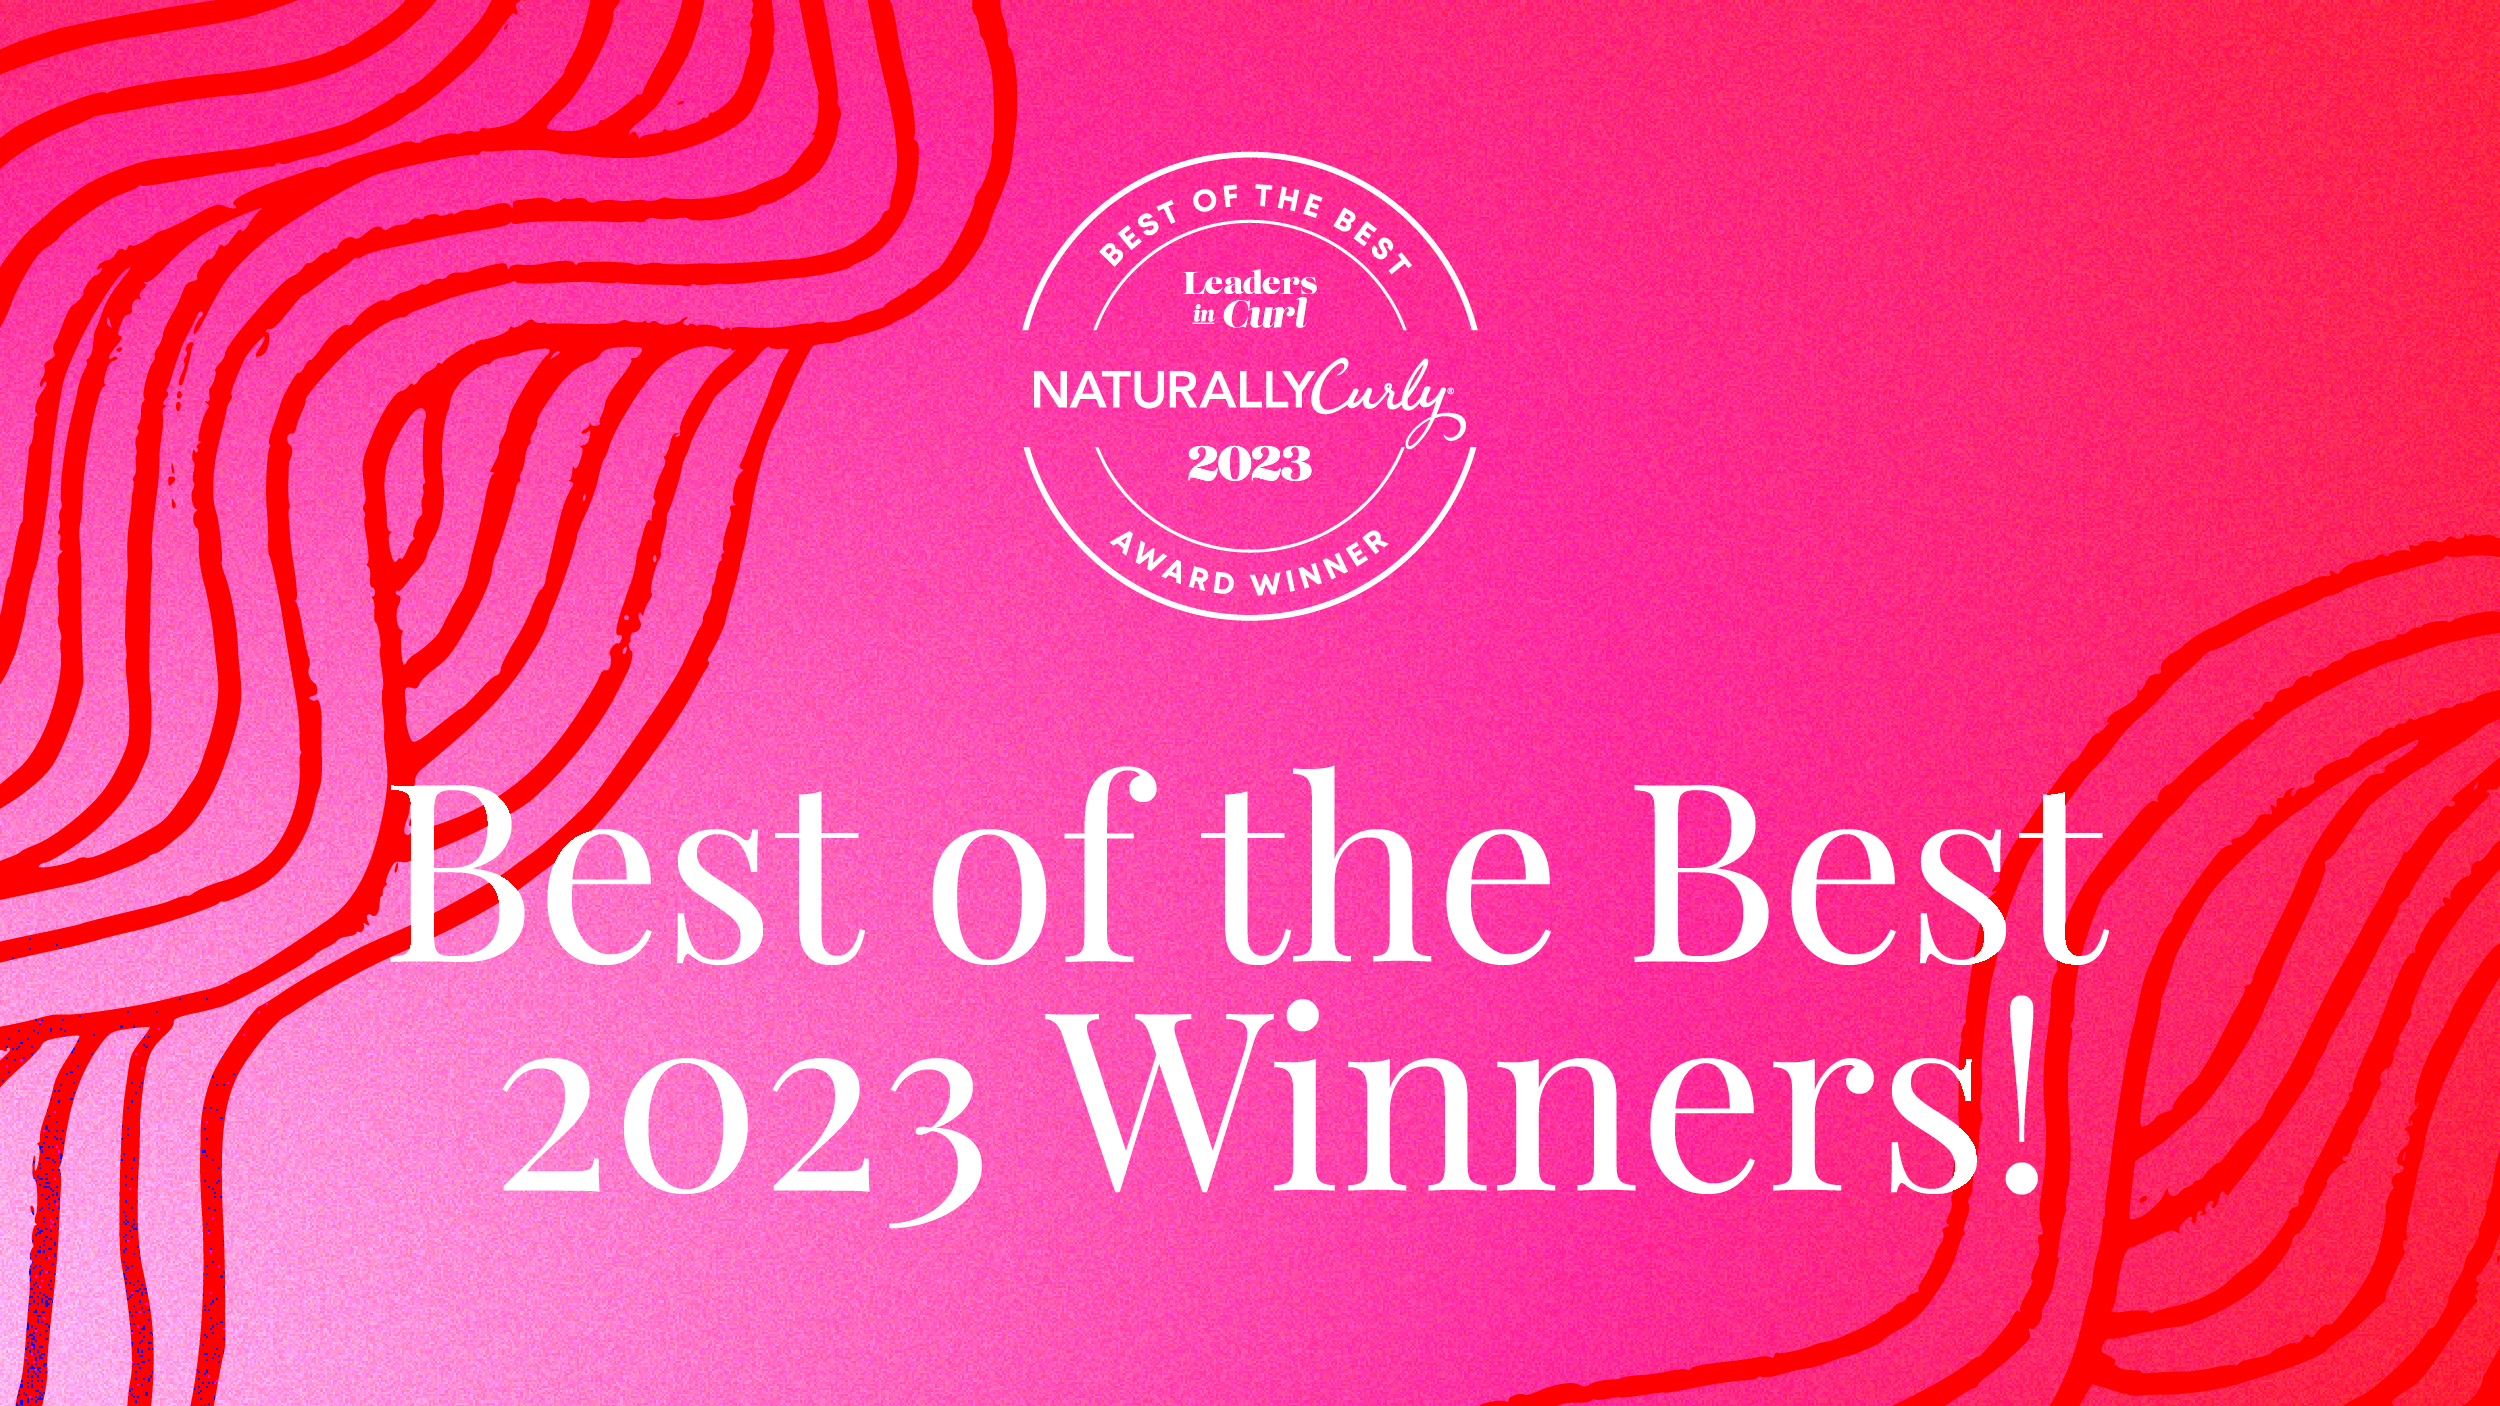 text that reads "NaturallyCurly Best of the Best 2023 Winners!" on a wavy background